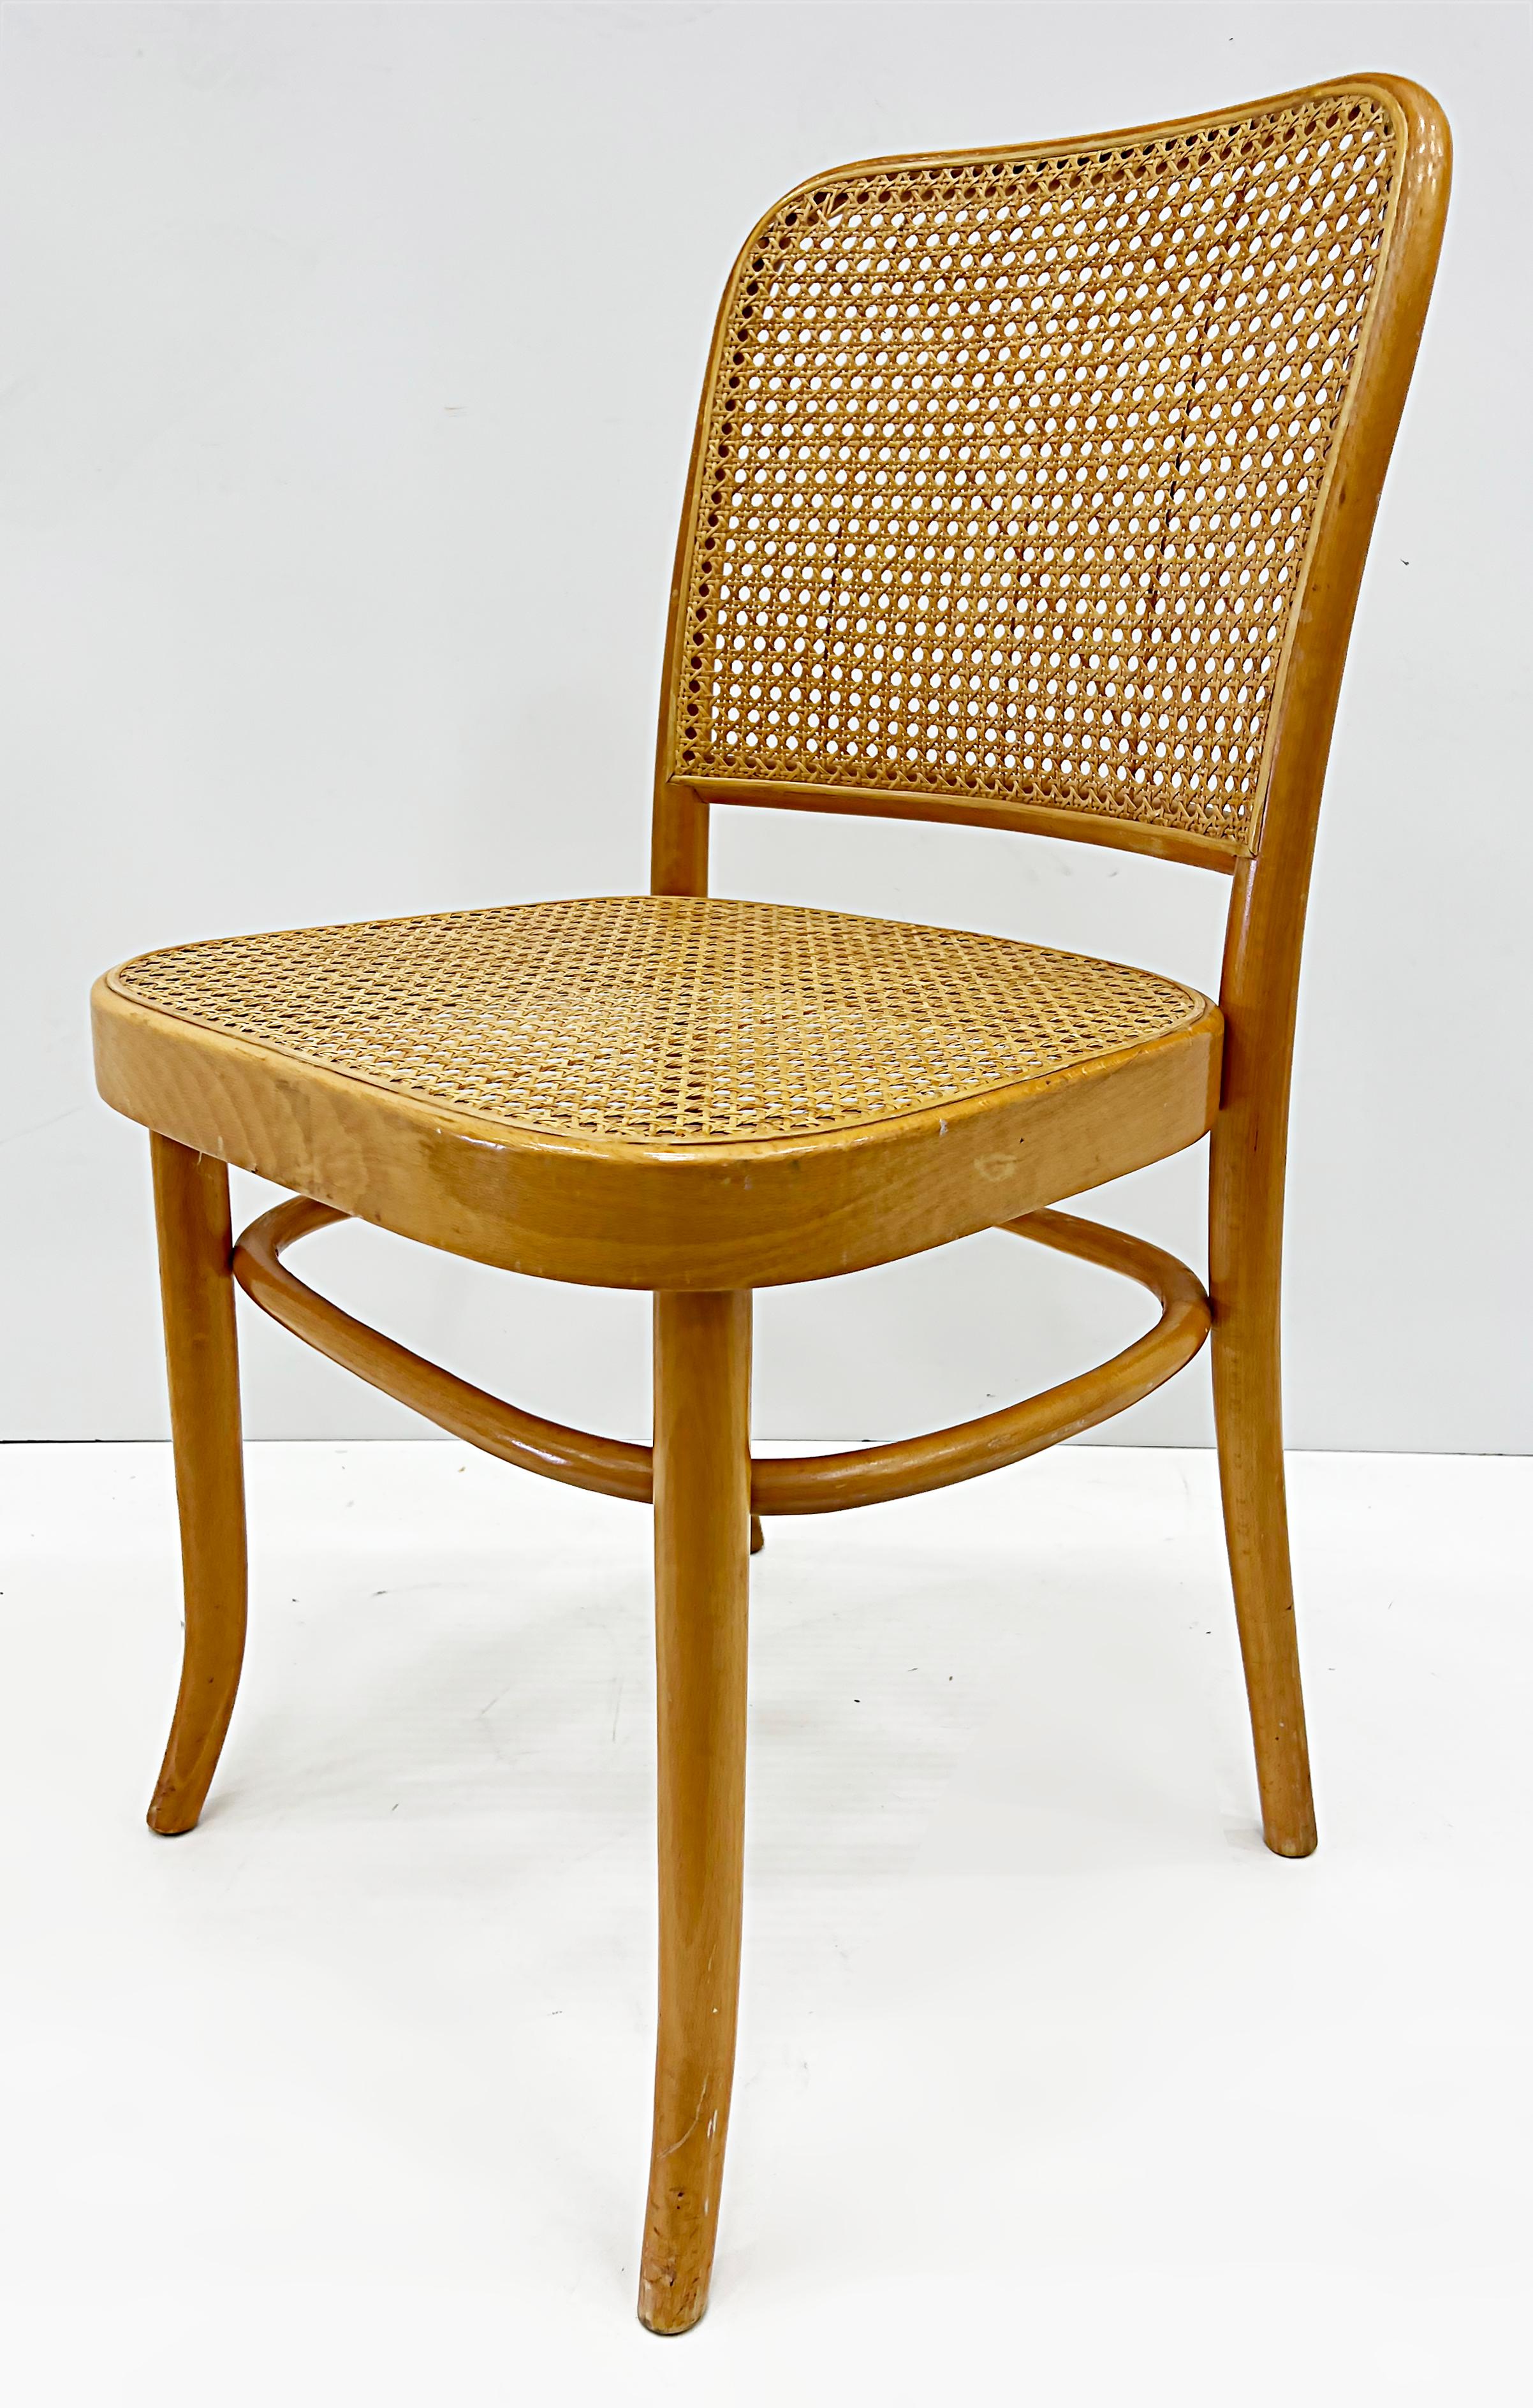 Salvatore Leone Vintage Bentwood Caned Chairs, Thonet Style For Sale 2